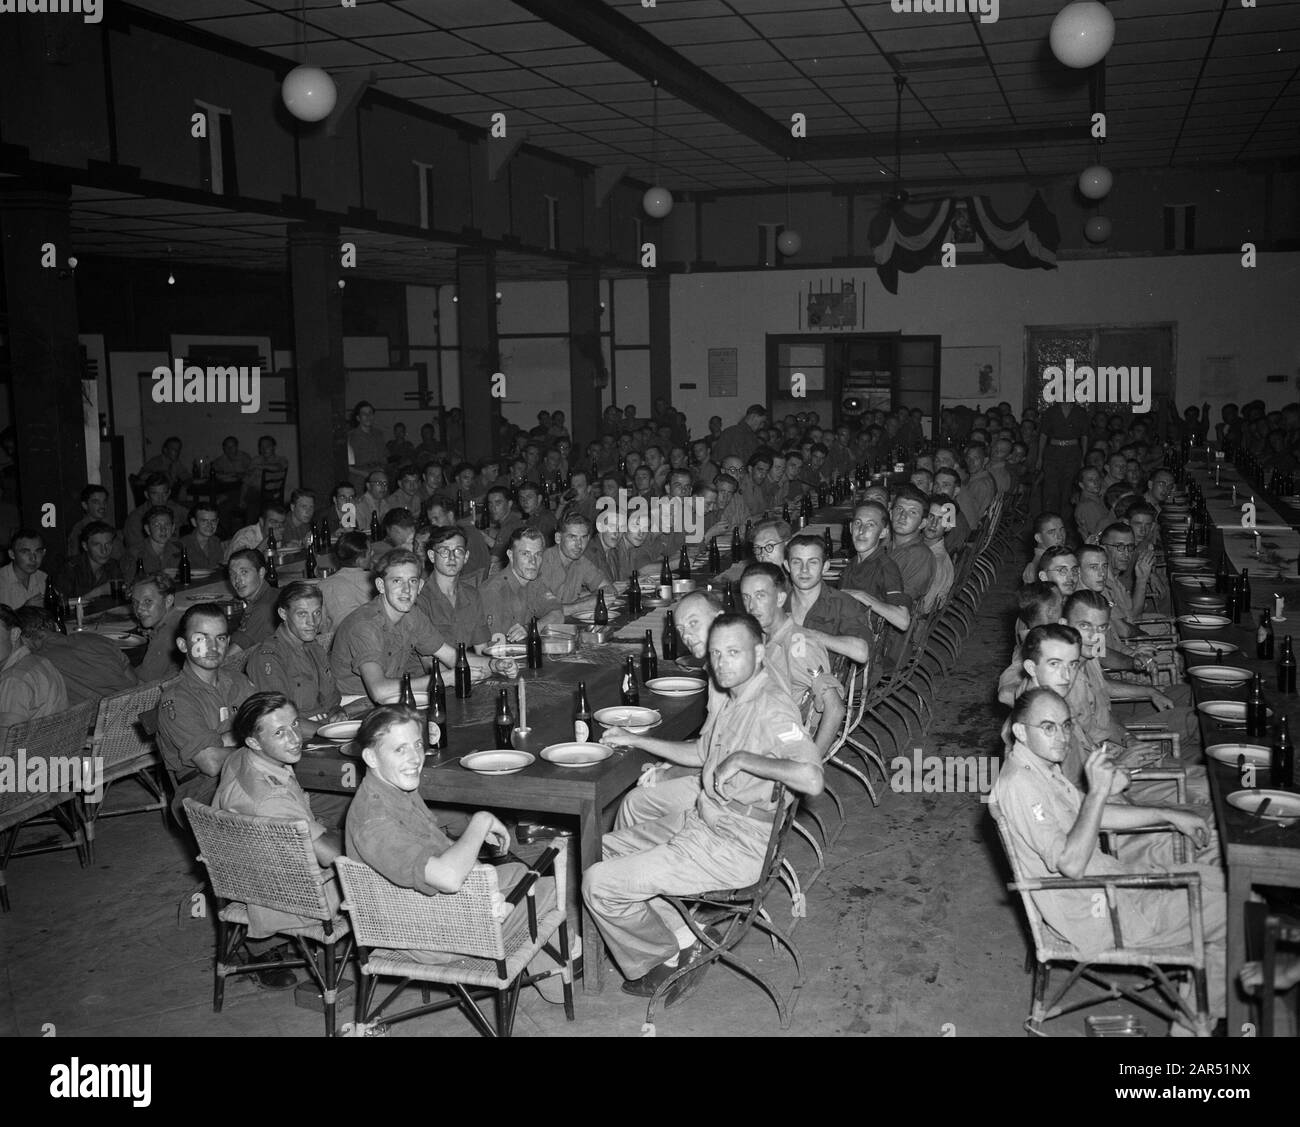 Joint meal during the Christmas celebration Date: 25 December 1946 Location: Indonesia, Dutch East Indies Stock Photo